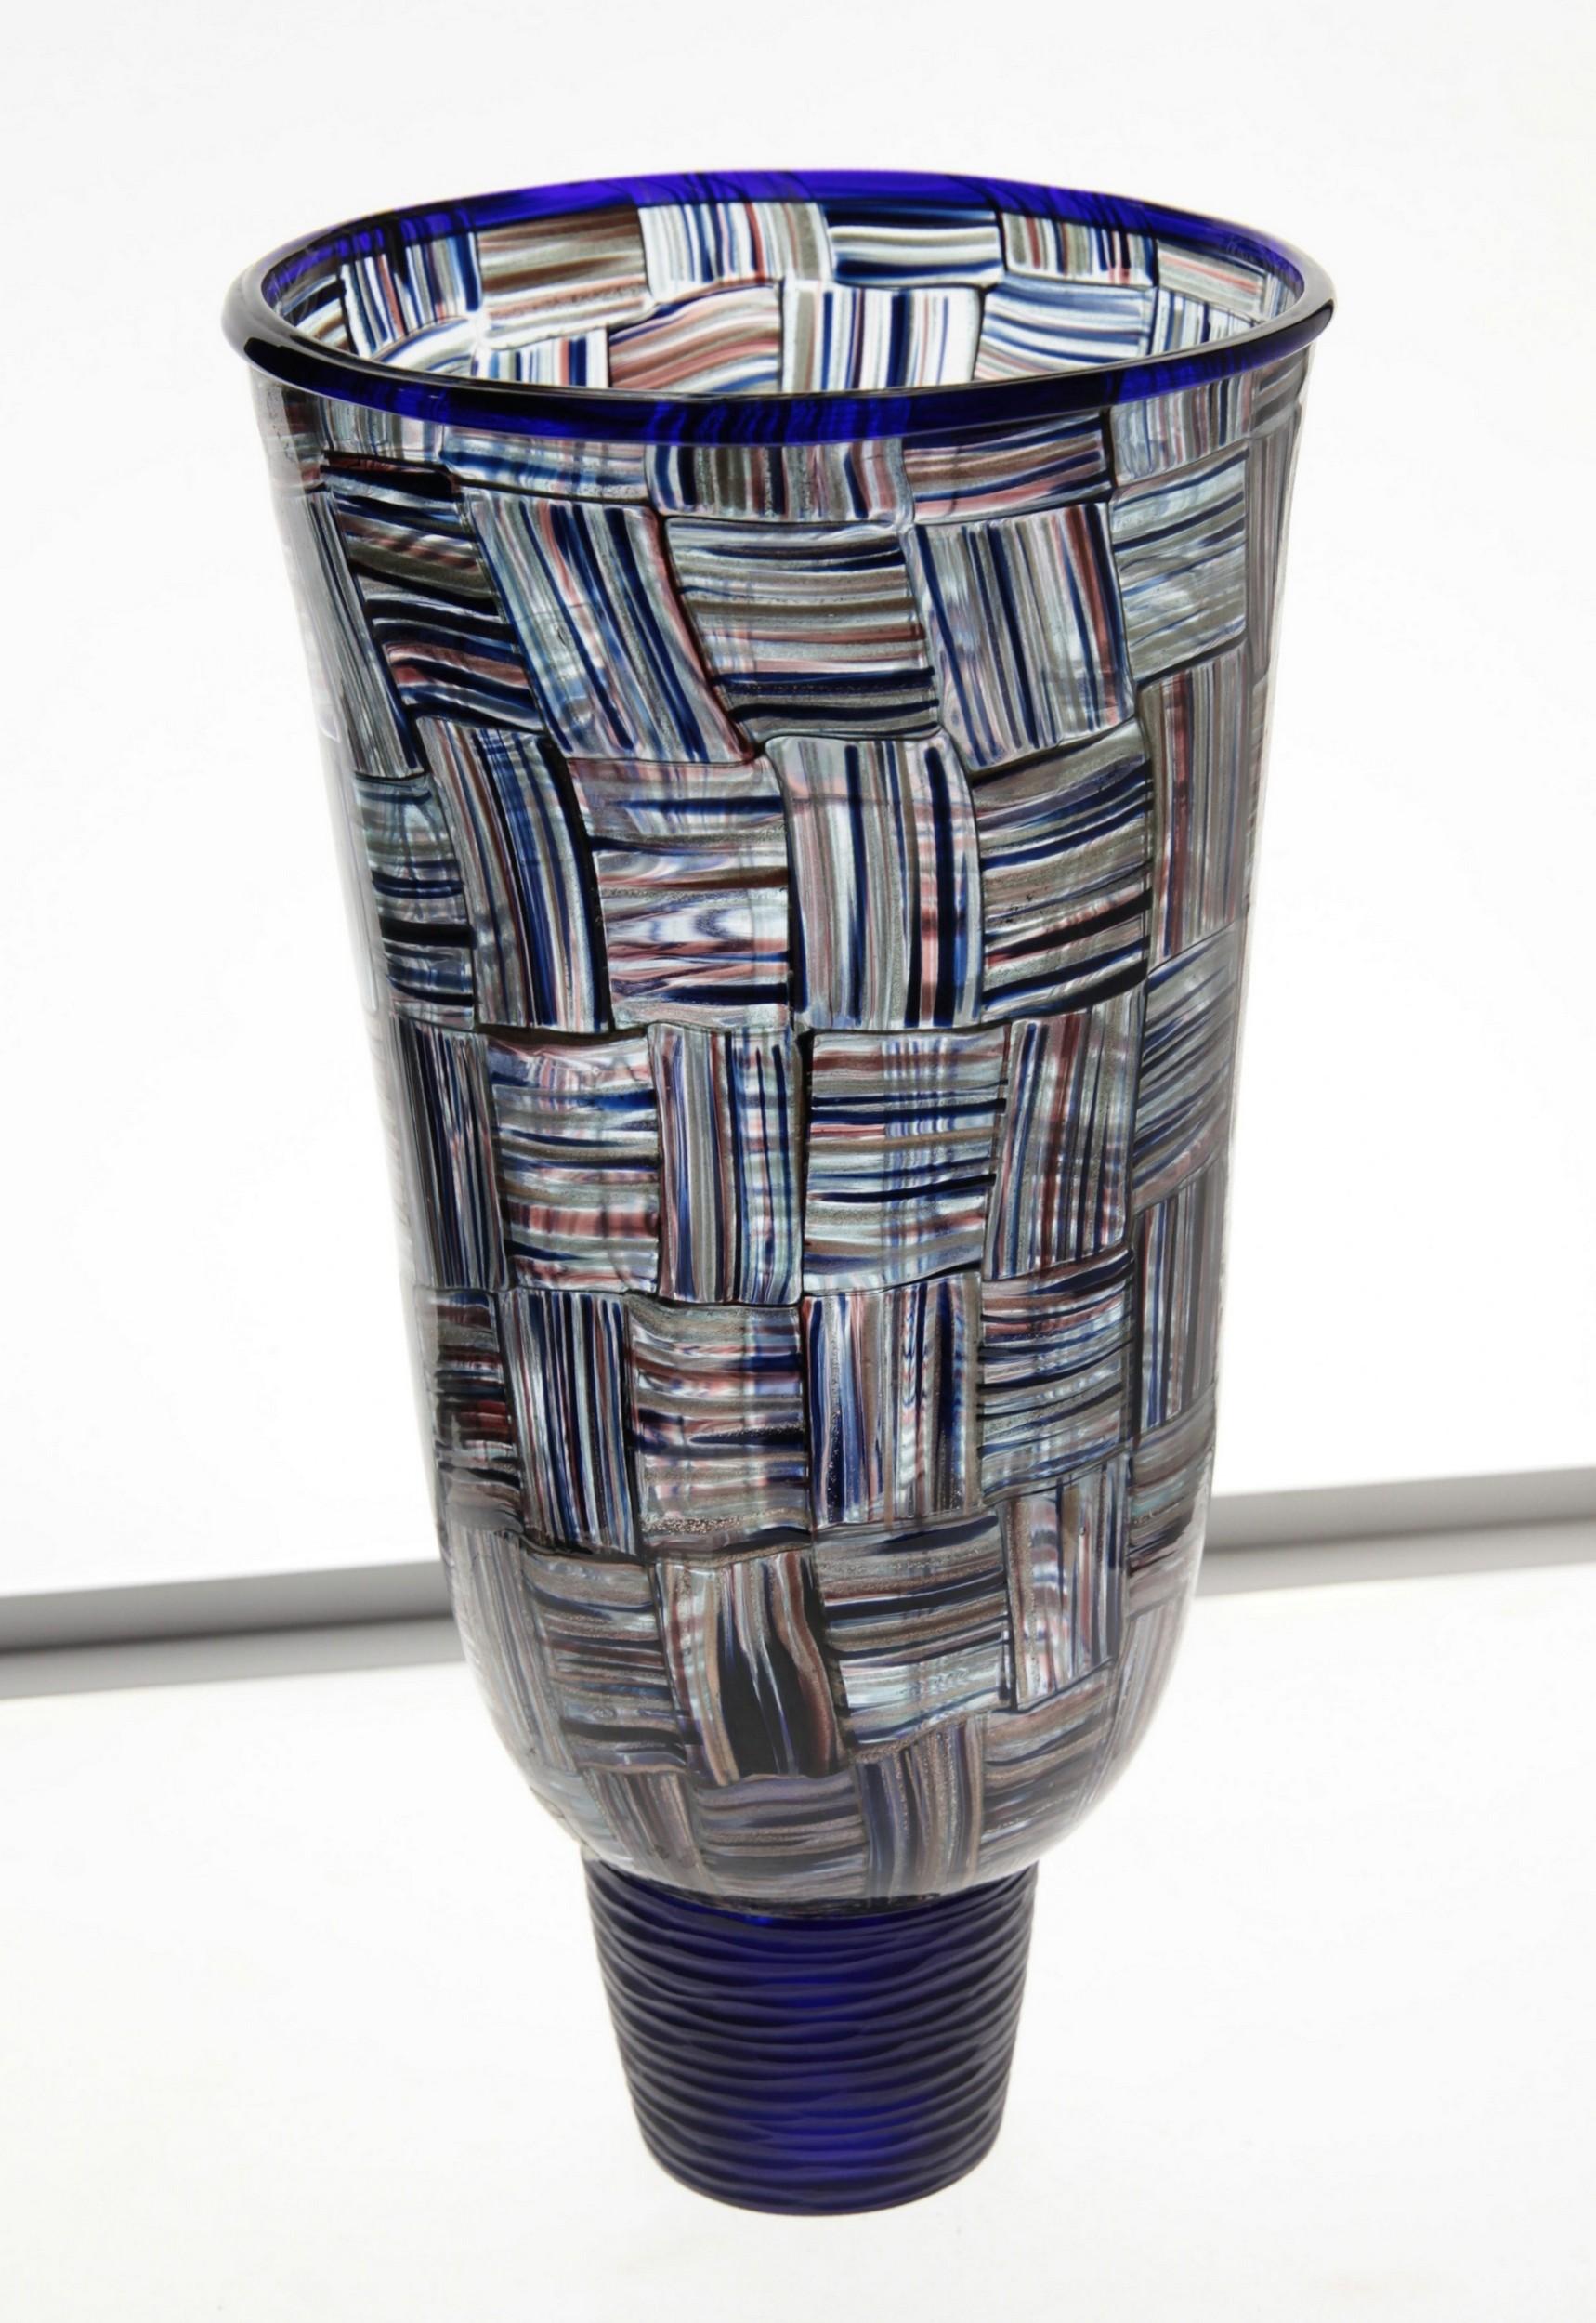 A splendid vase from Pauly showroom. It's made with the piera (roll up) technique with a combination of fettucce (bands) made of several thin bands of avventurina in different color.
The classic avventurina color (sort of brown), cobalt avventurina